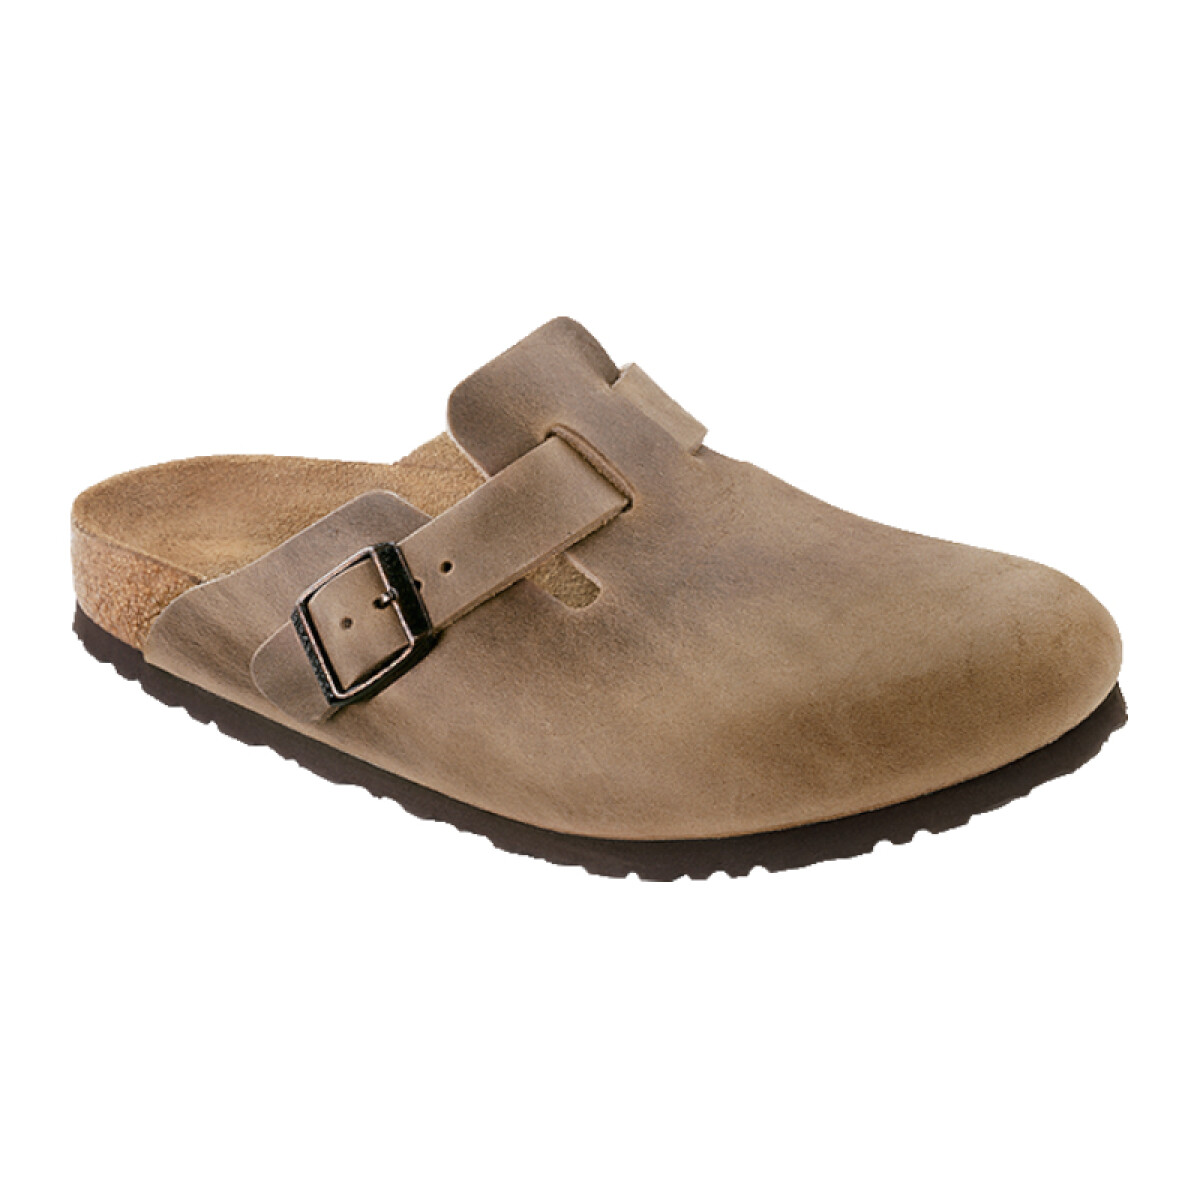 Zueco Boston Soft Footbed - Oiled Leather - Regular - Brown 